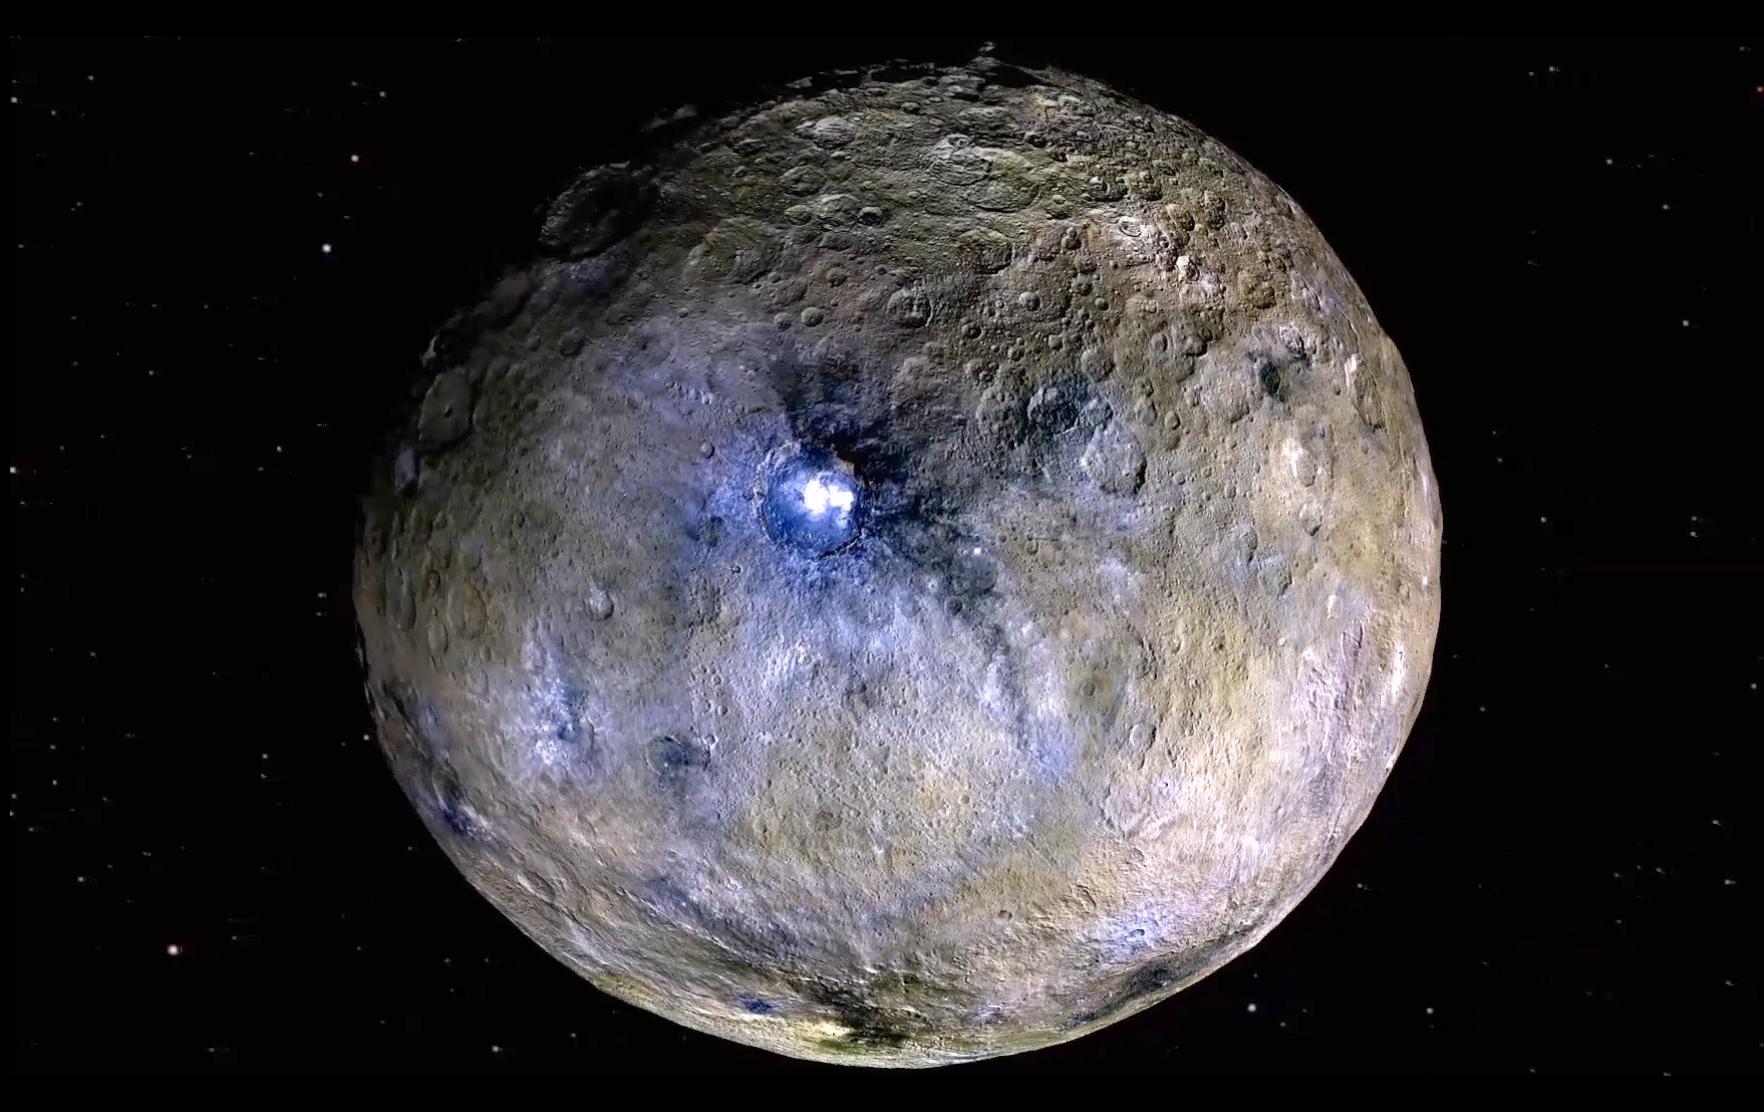 Strange dwarf planet Ceres may have formed at the icy edges of the solar  system, scientists suggest | Space